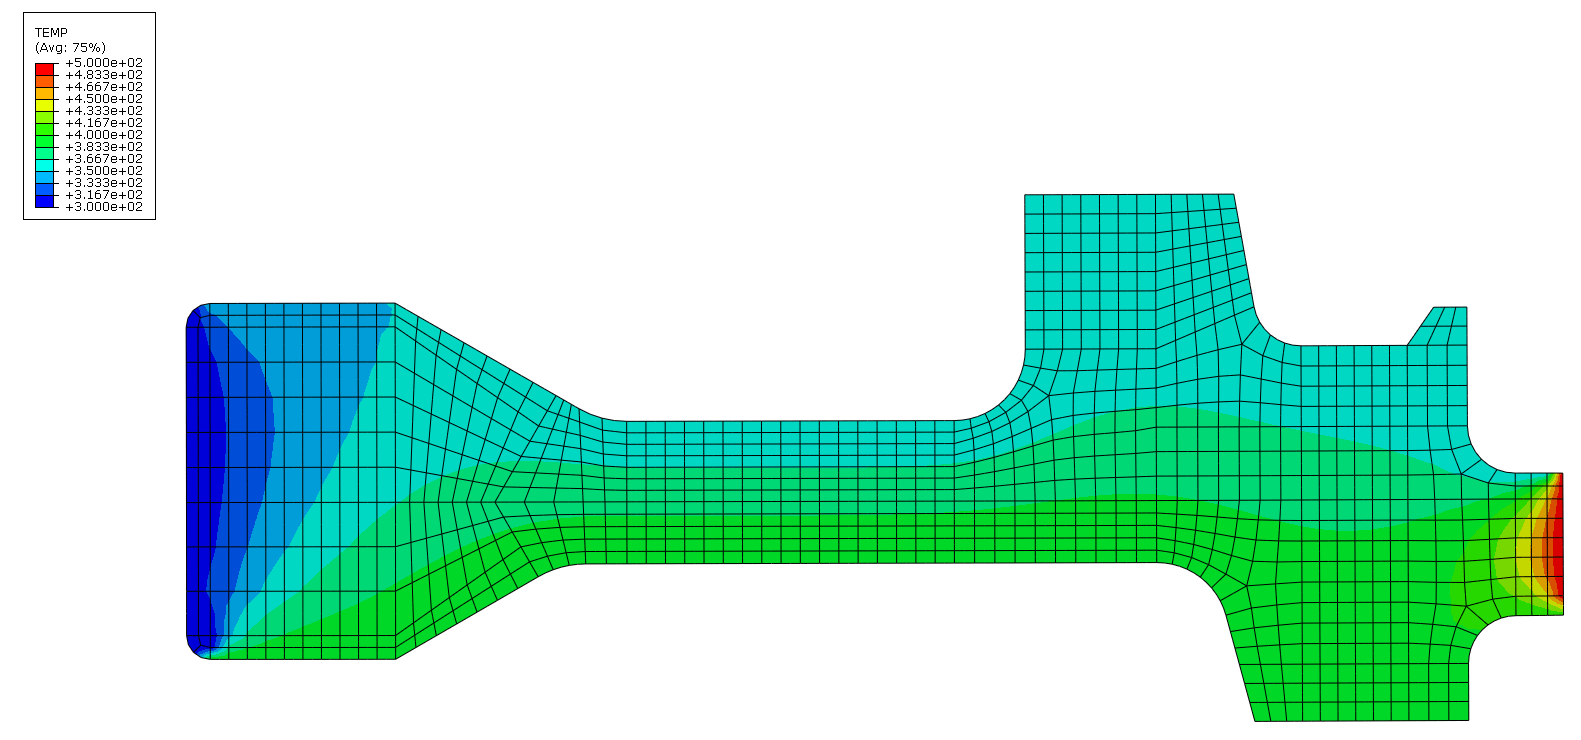 Material Modeling Simulation